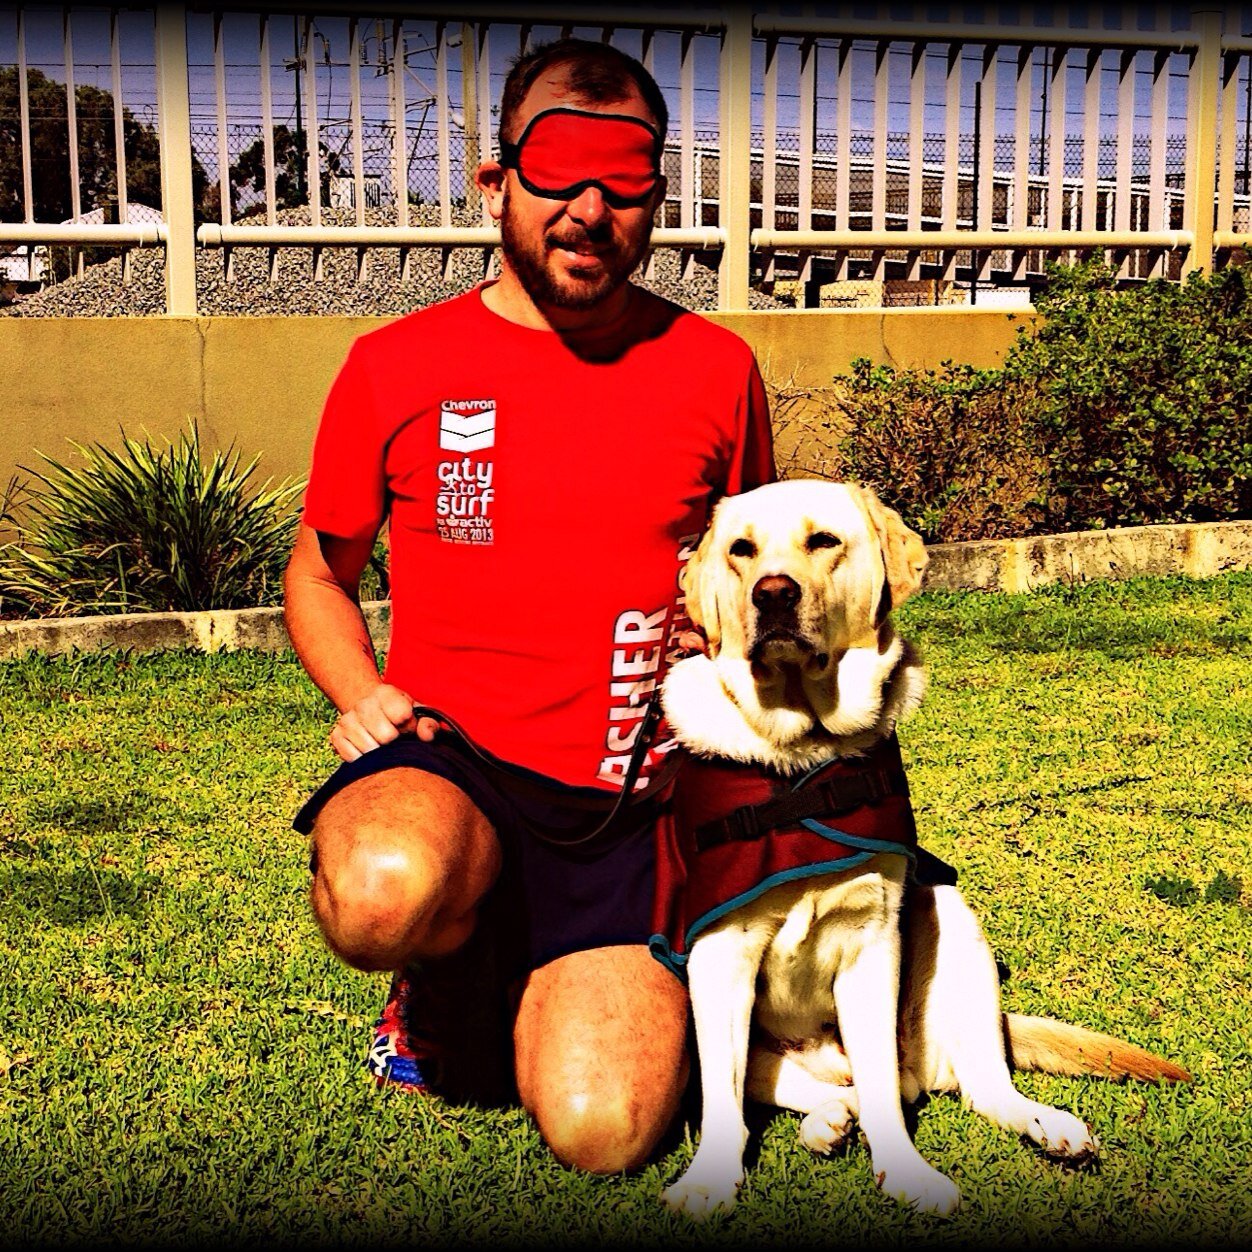 My name is Sean and I'm hoping to make history by being the 1st person in Australia to run a Marathon blindfolded to raise $30,000 for a guide dog.